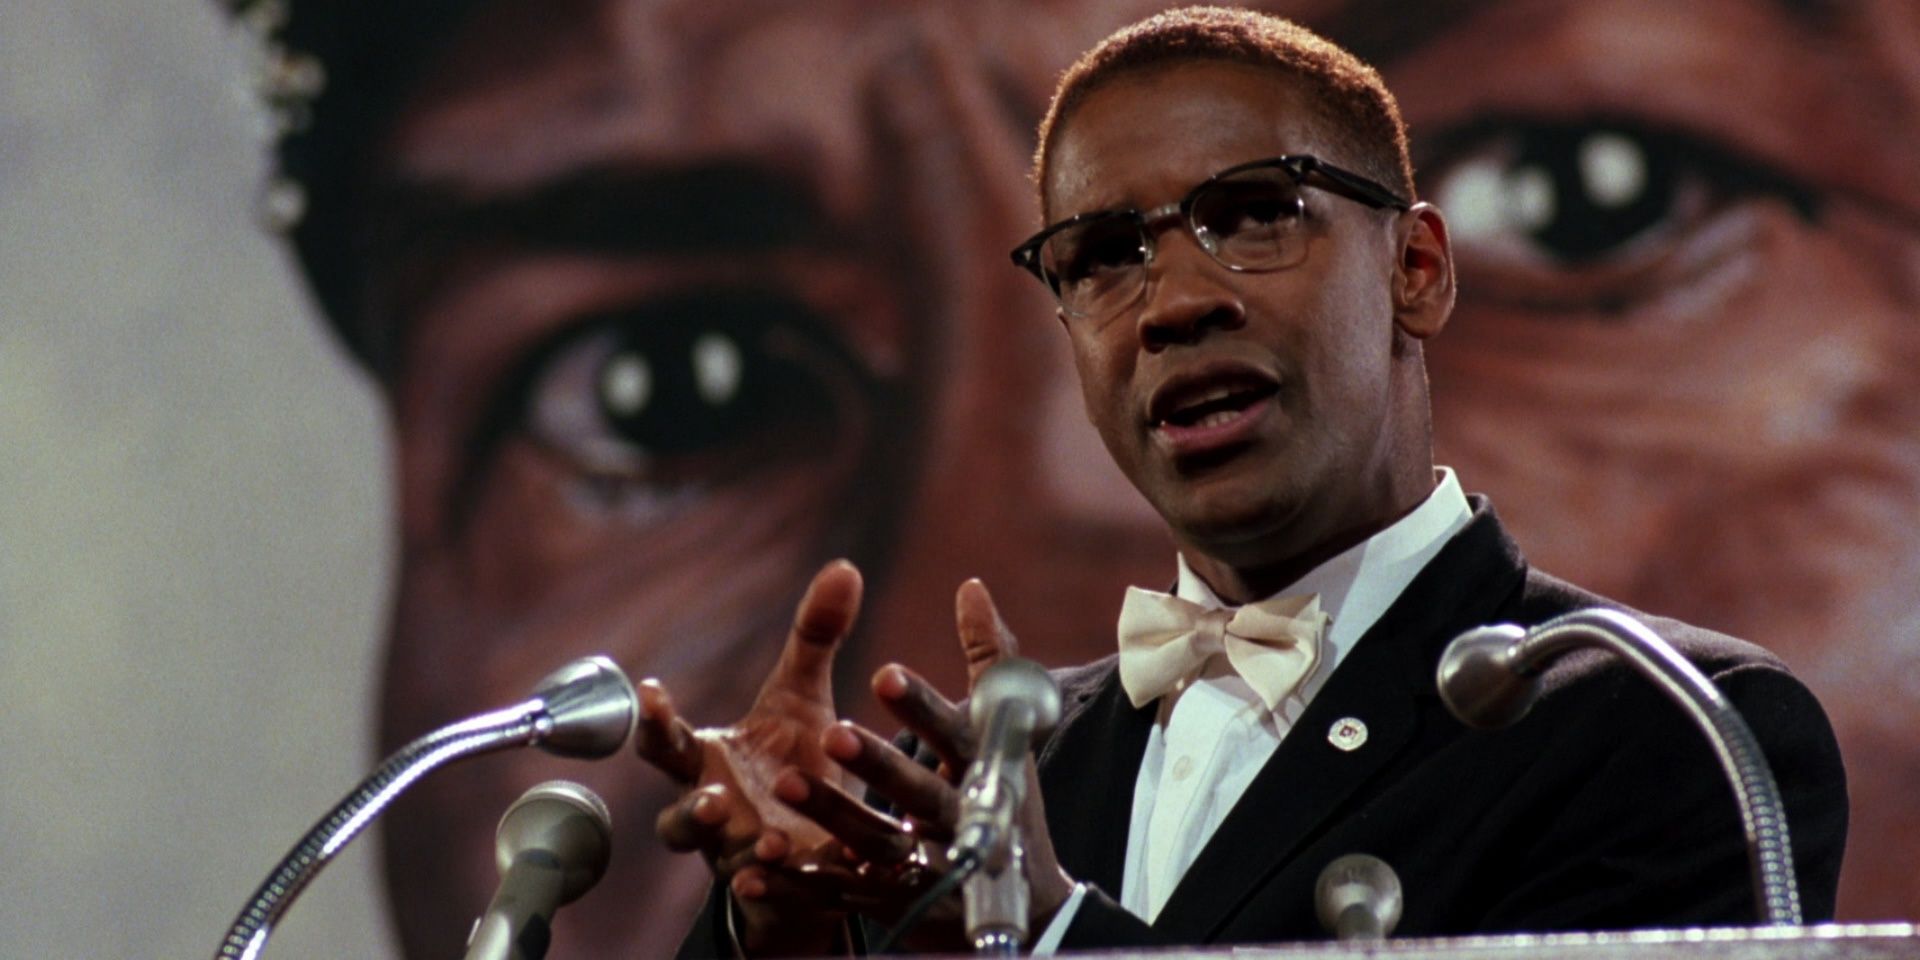 Denzel Washington as Malcolm X speaking on a podium in Spike Lee's biographical film Malcolm X